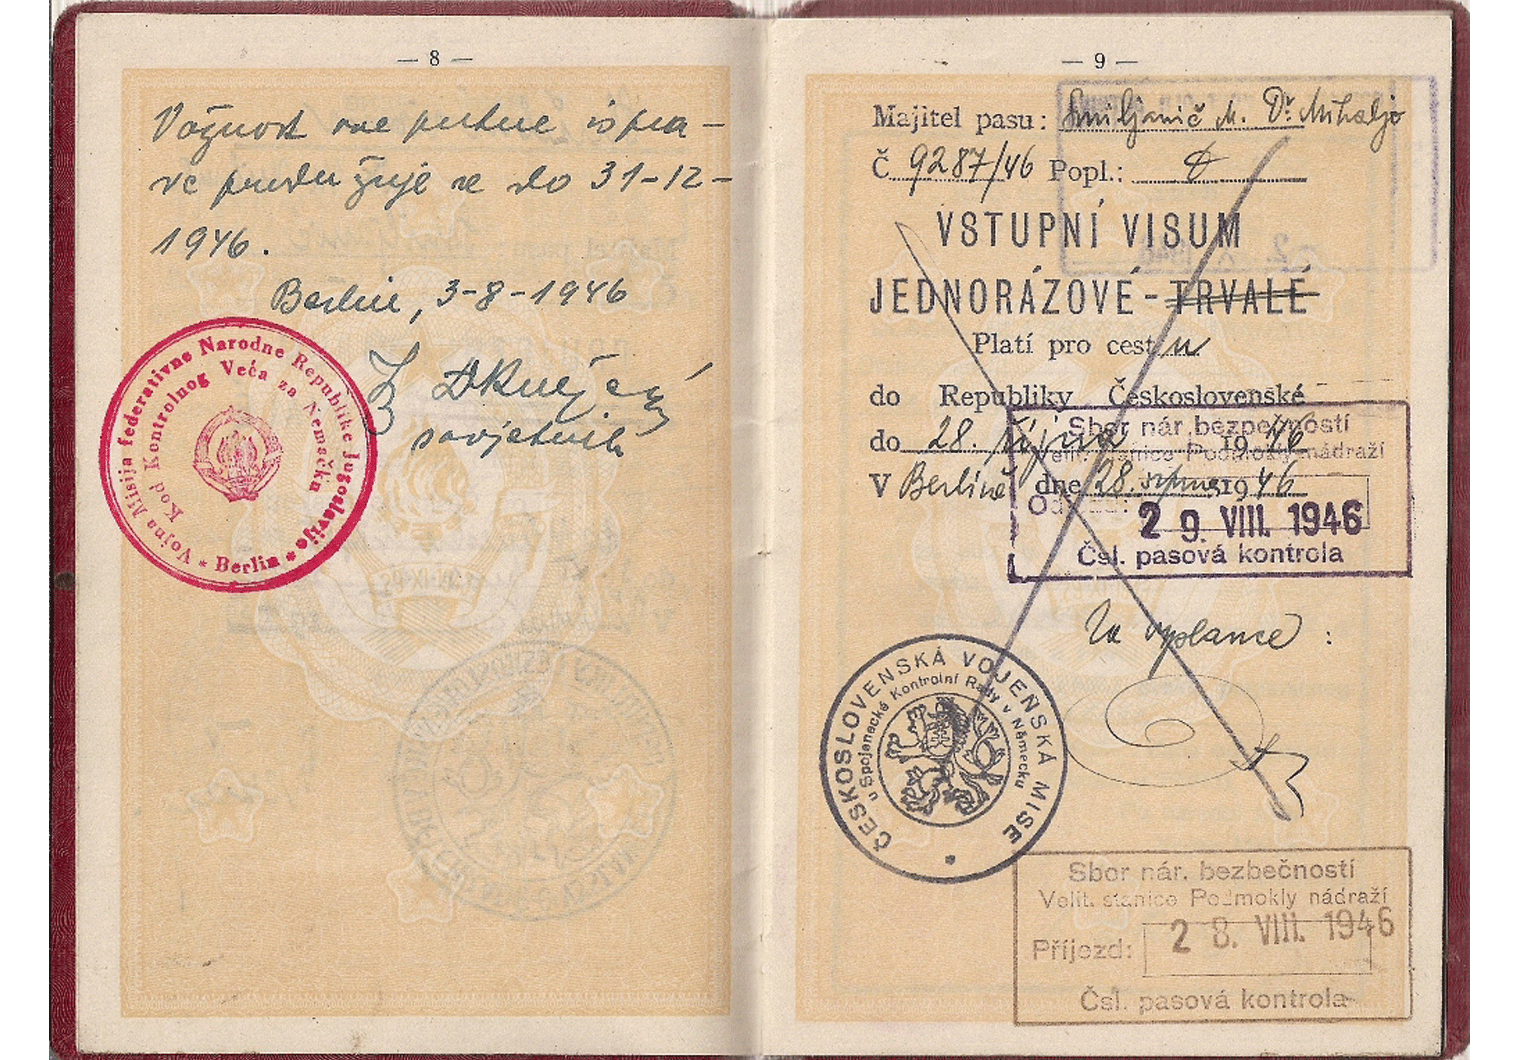 Issued for serving in Berlin